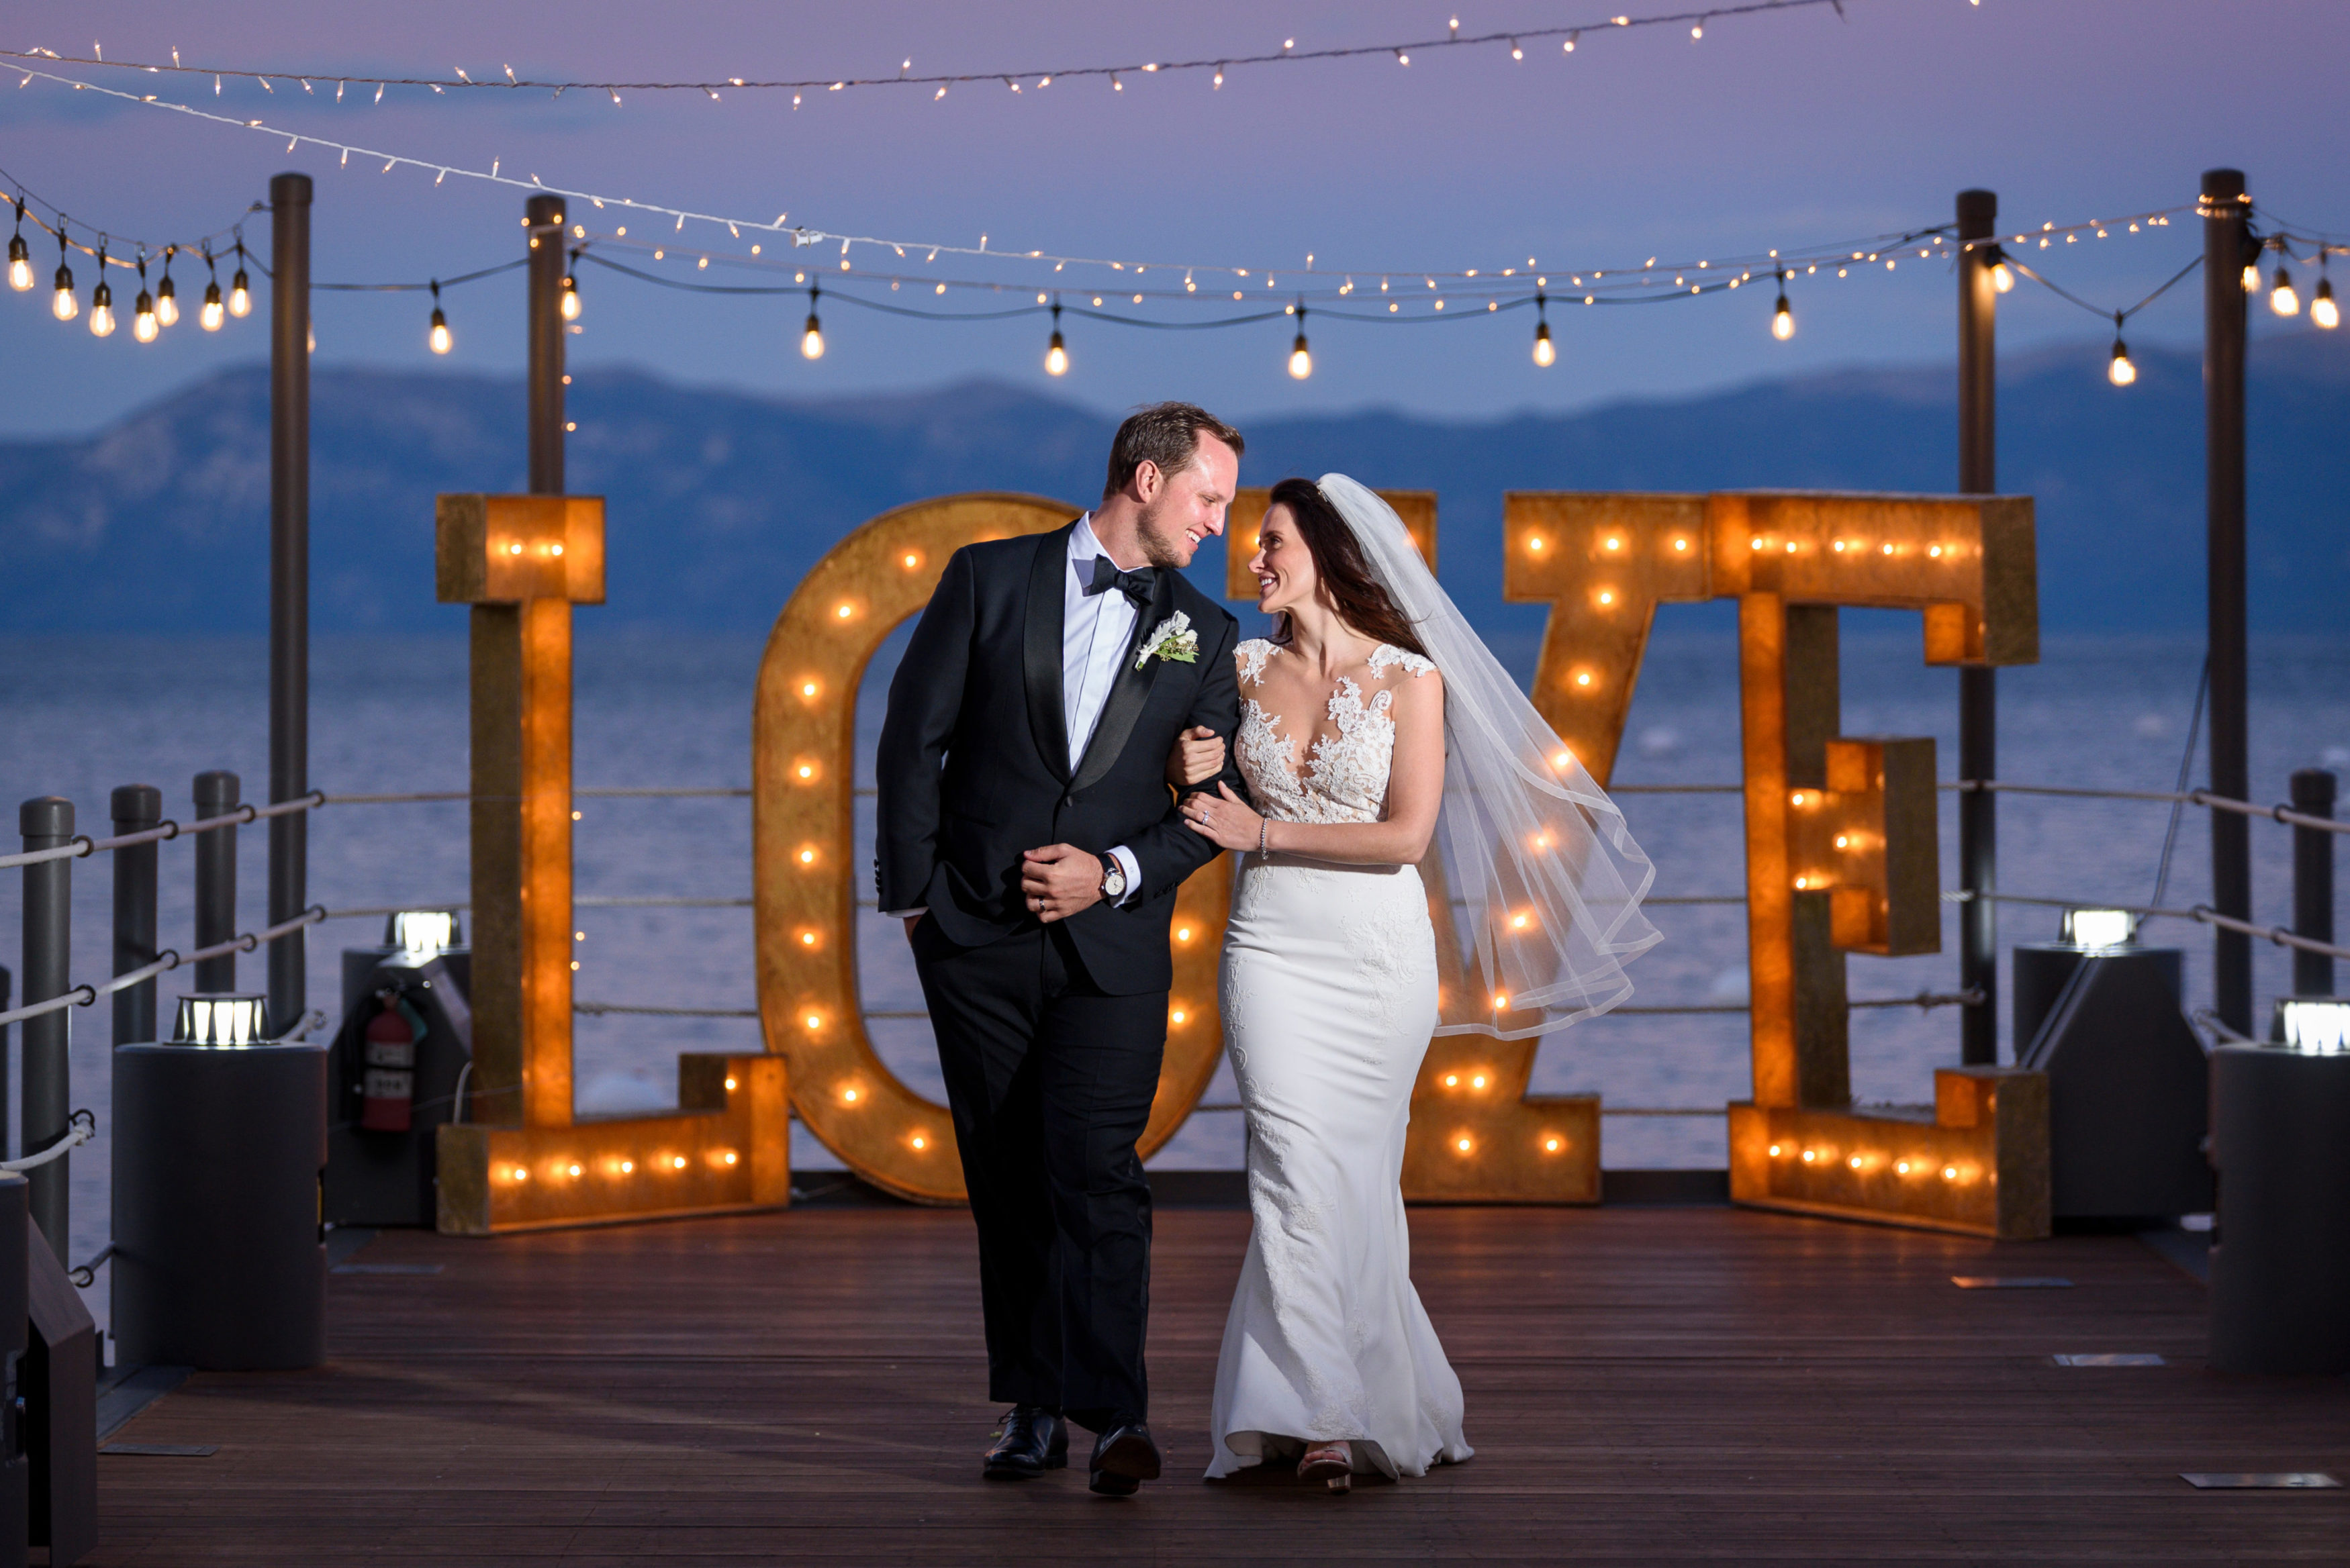 A bride and groom look at each other in front of a large sign that says "Love" on the West Shore Cafe pier over looking Lake Tahoe